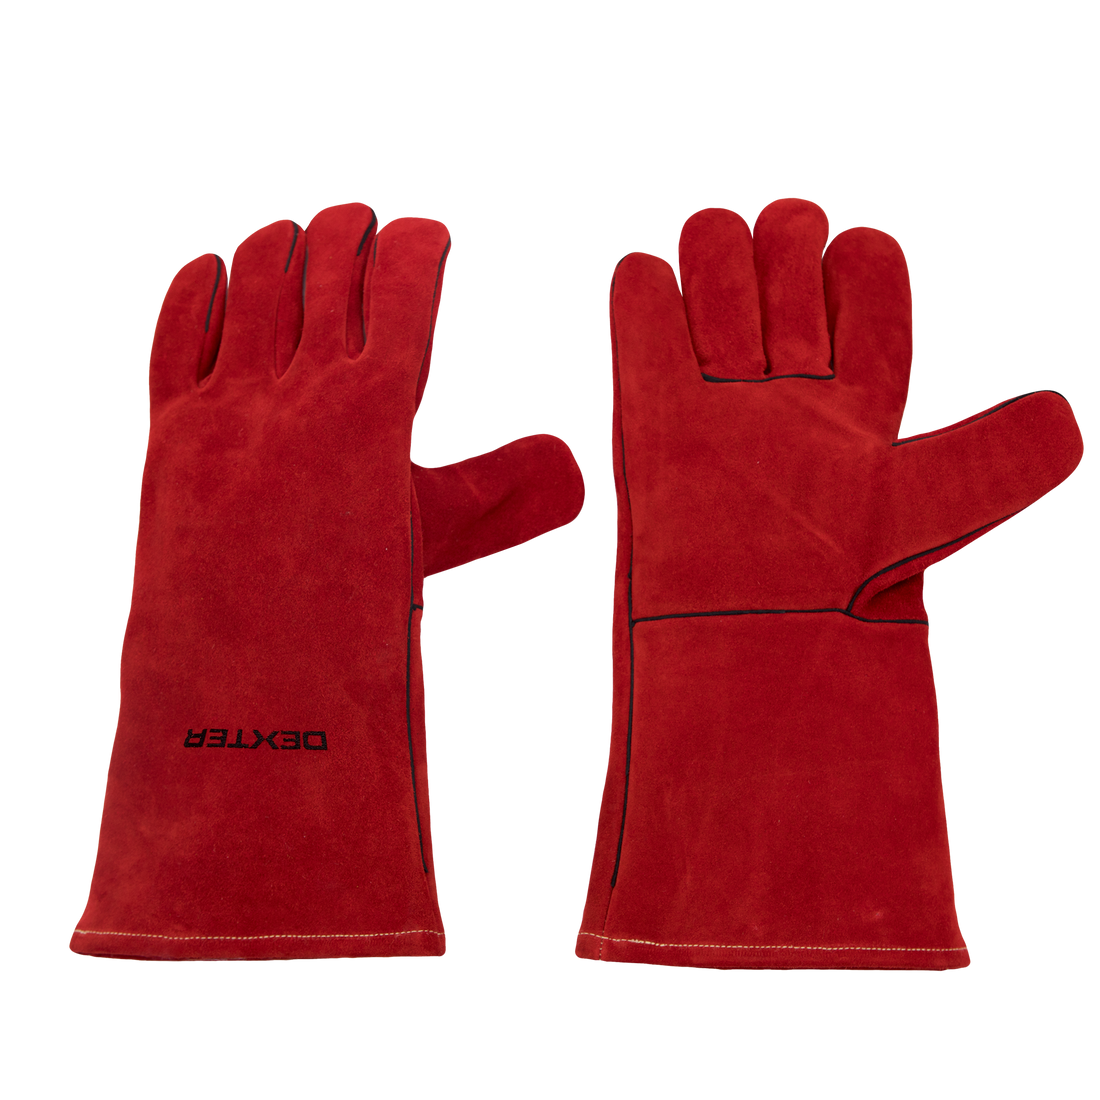 DEXTER LEATHER, POLYESTER AND COTTON WELDING GLOVES SIZE 11XXL